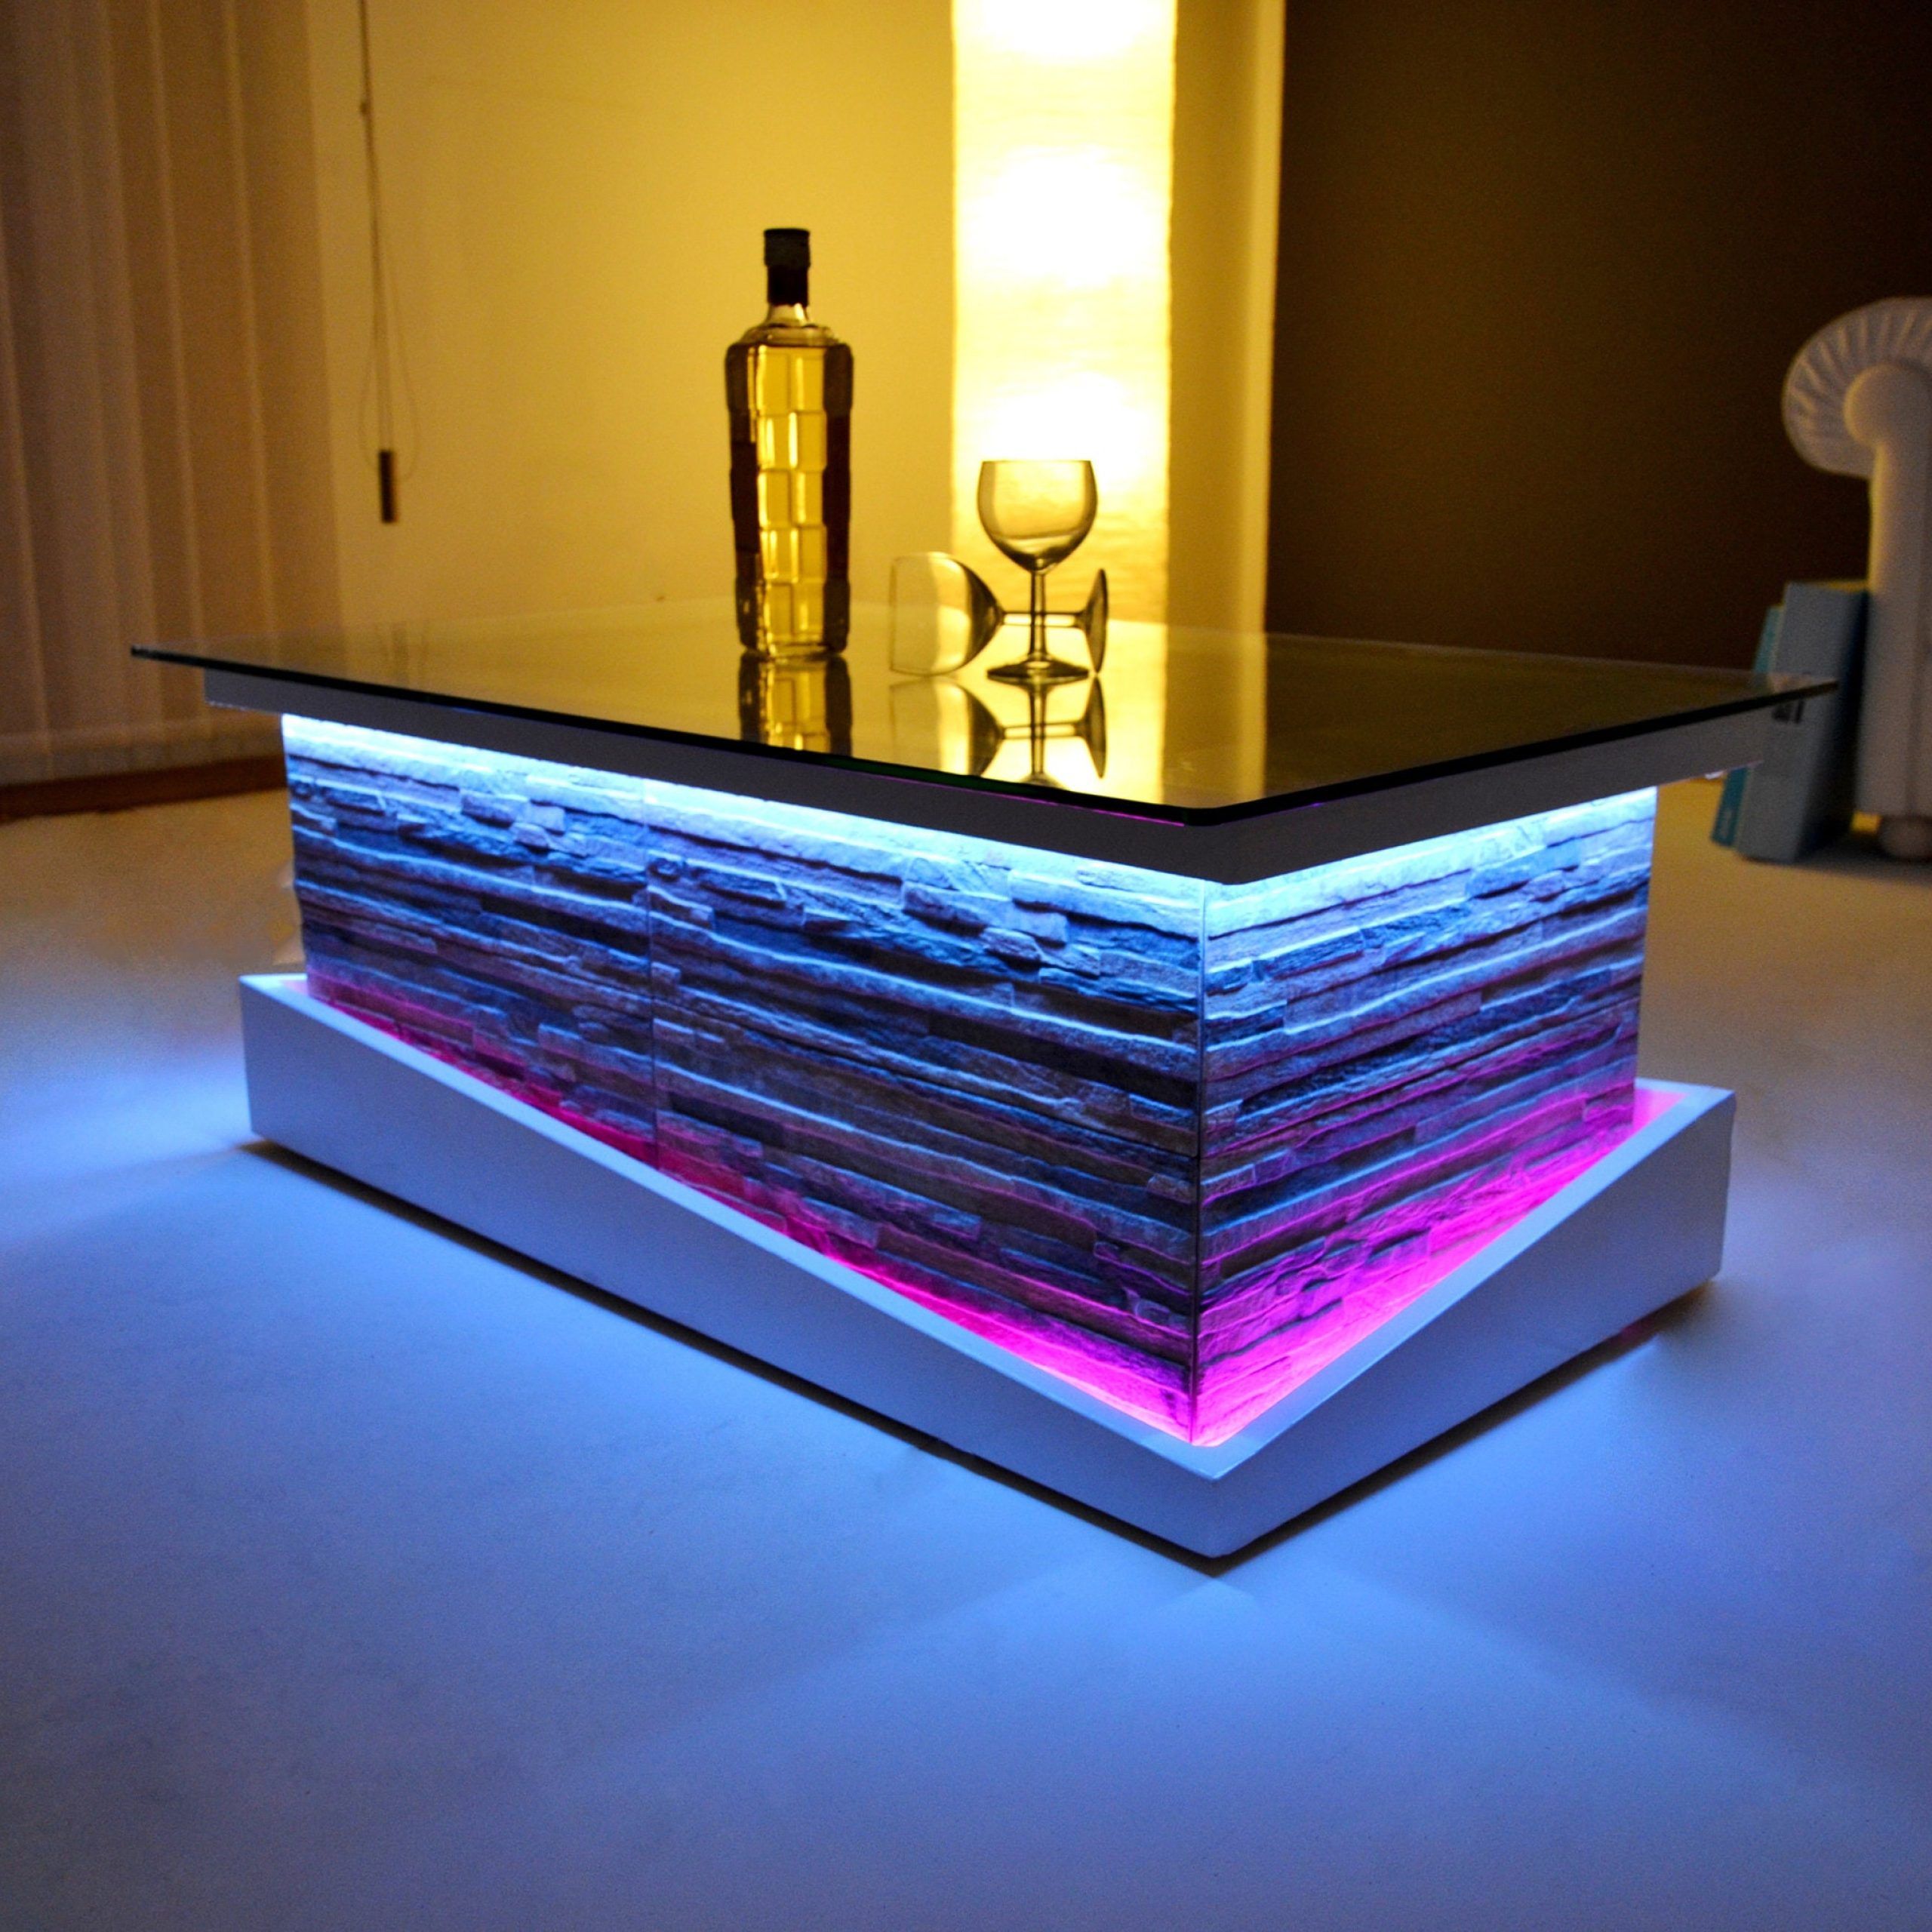 Glass Coffee Table With Led Lights Rustic / Modern Design | Etsy Pertaining To Coffee Tables With Led Lights (View 3 of 20)